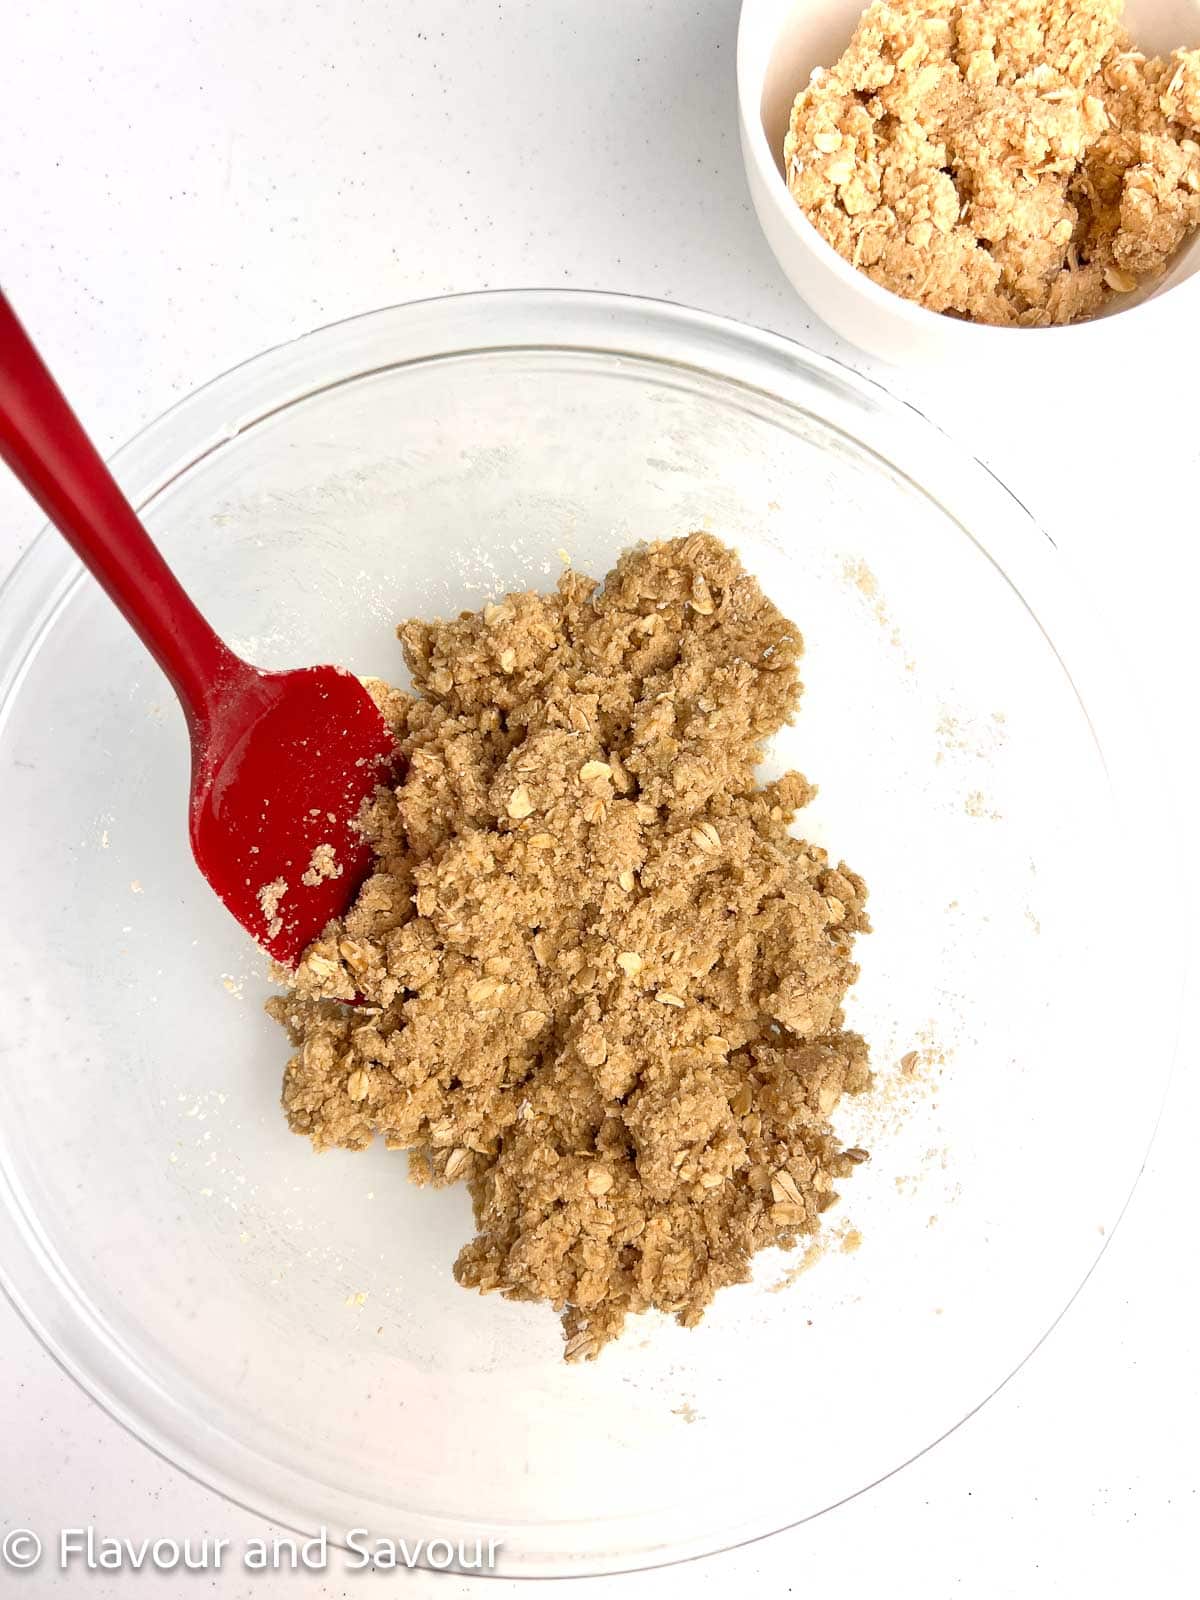 Crust mixture for cherry oat bars in a glass bowl.